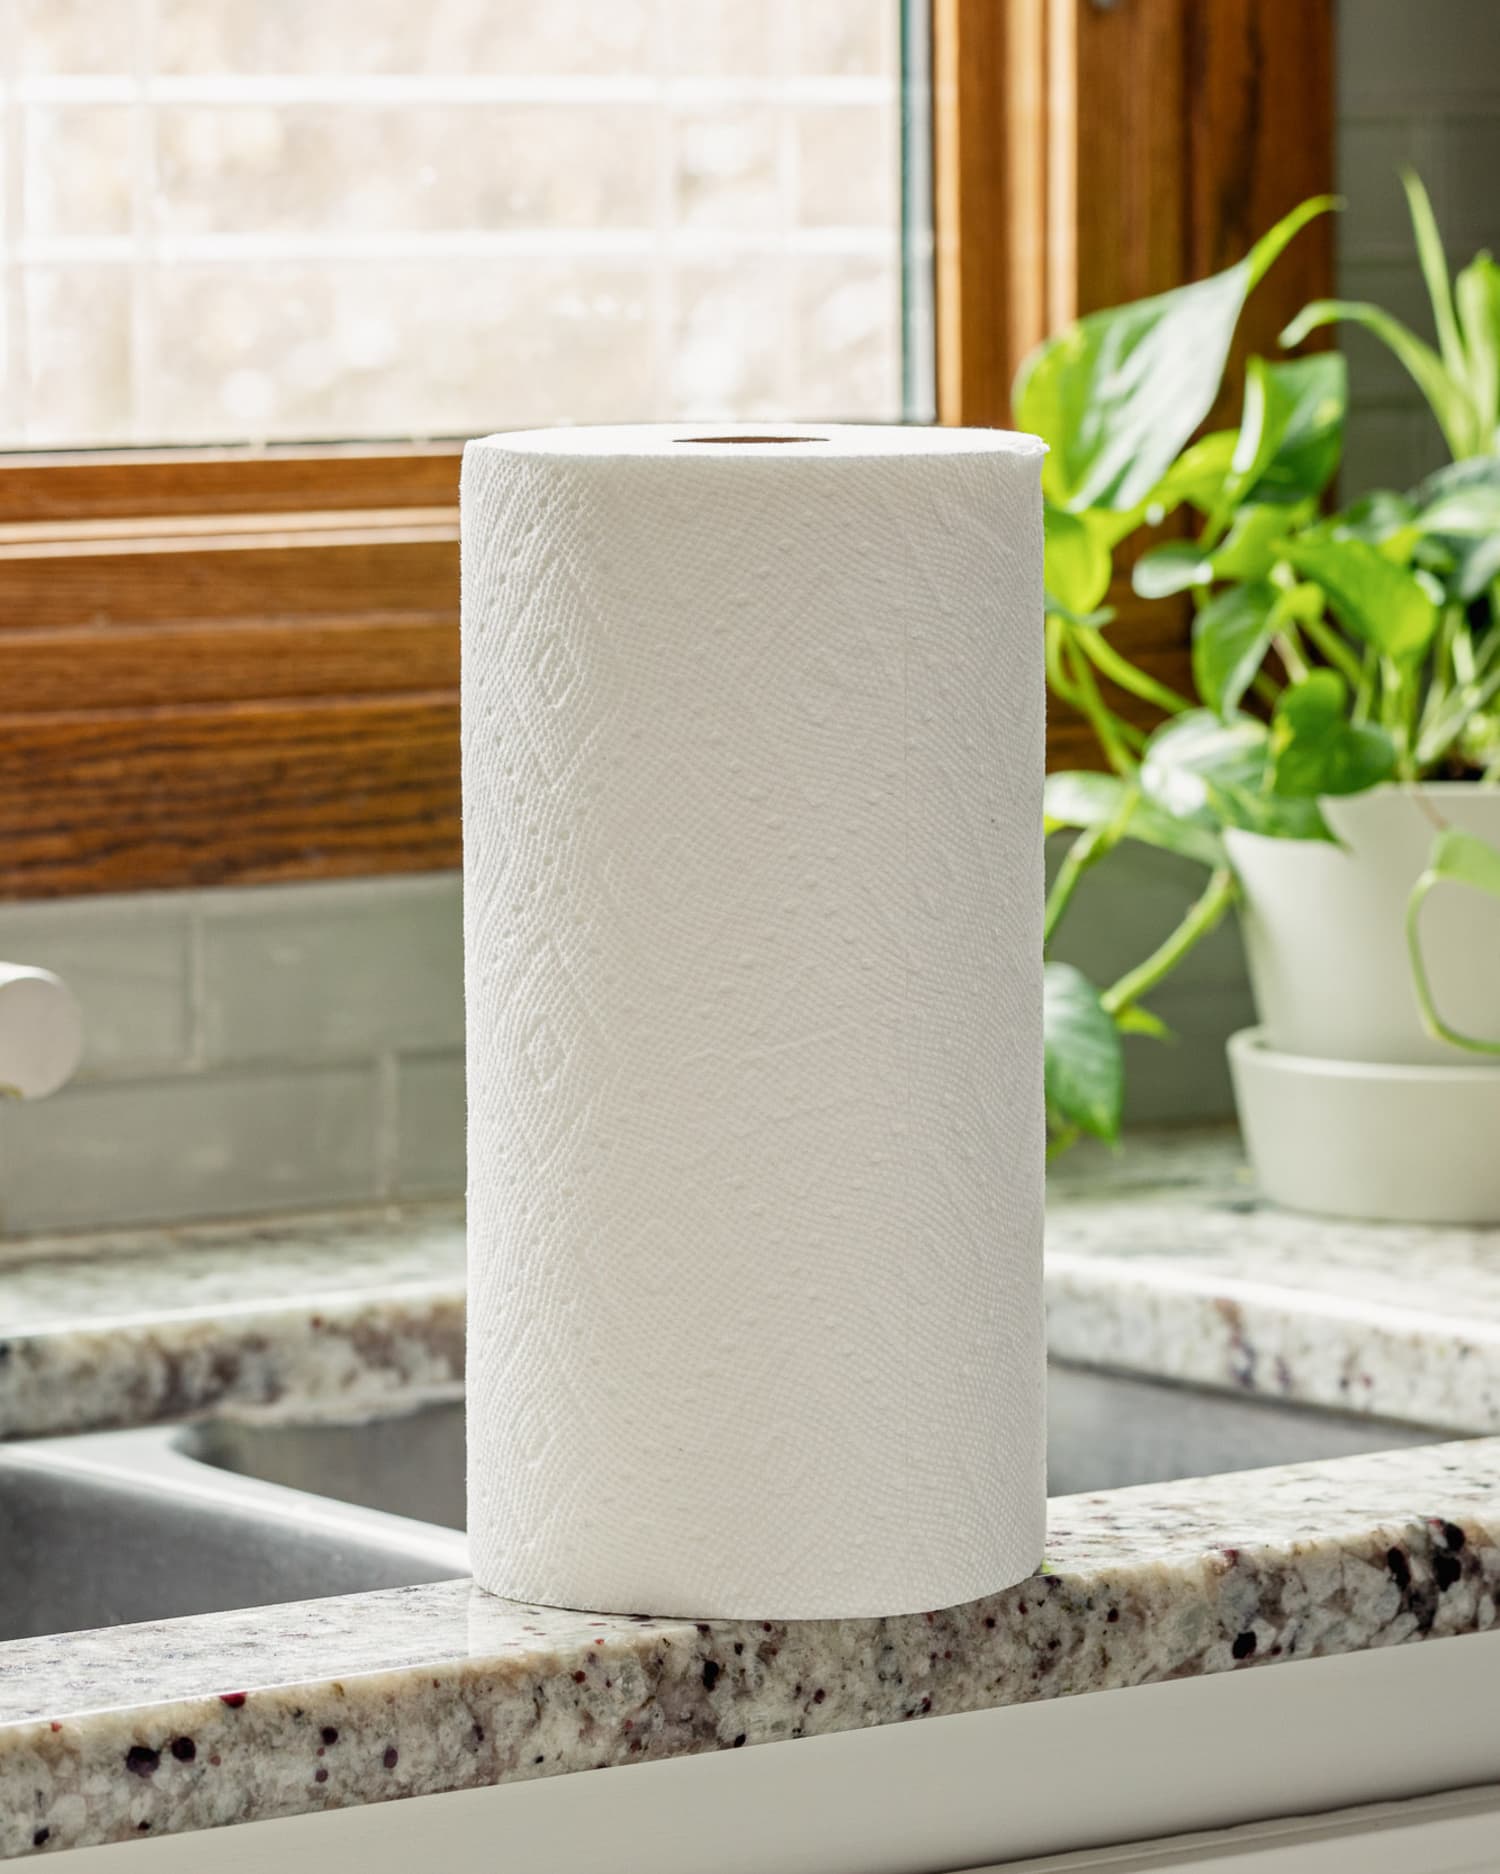 Why You Should Always Keep Paper Towels in Your Fridge (Plus, 7 Other Surprising Kitchen Uses)